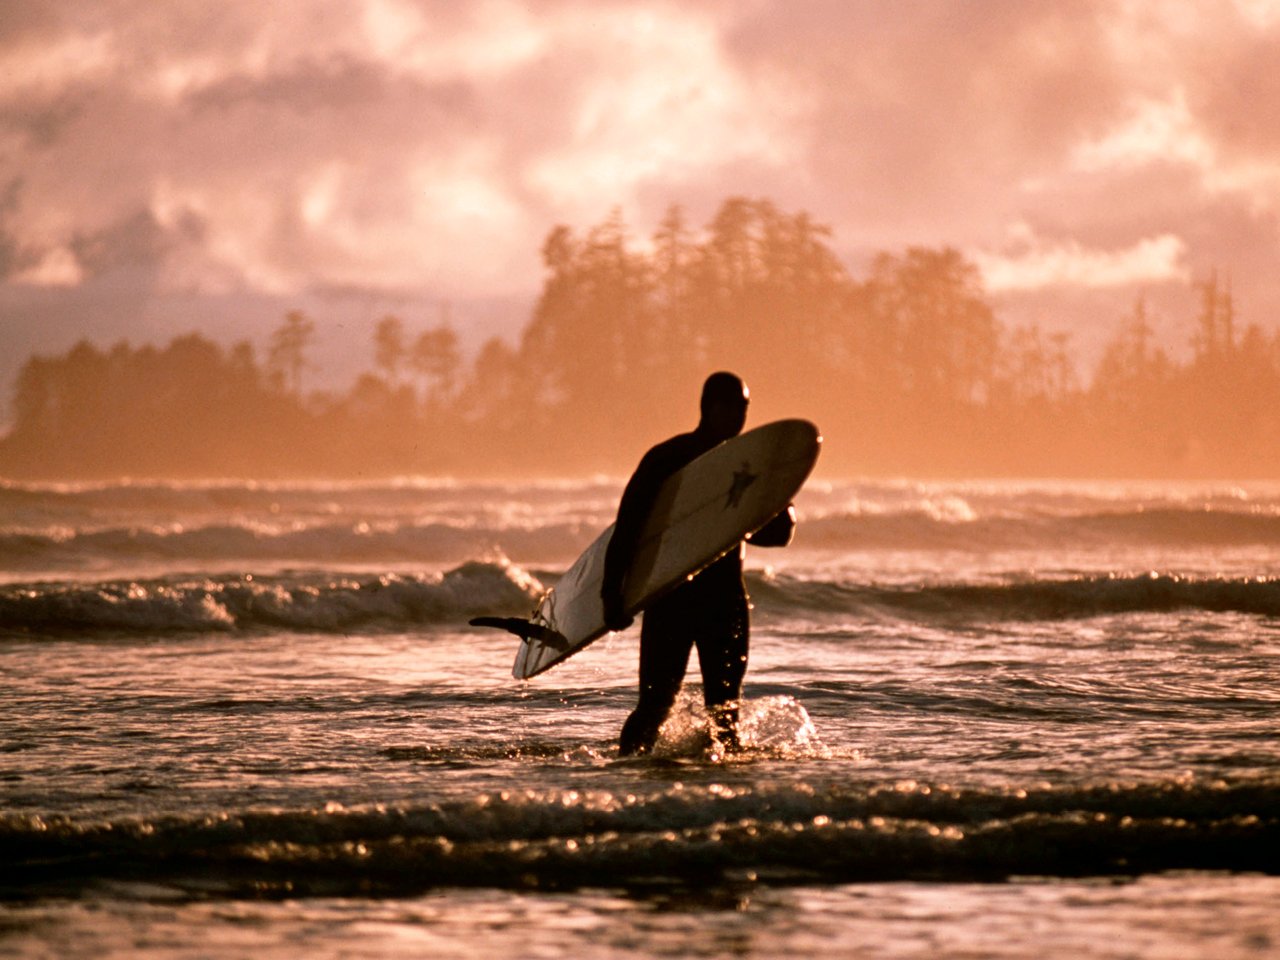 Full body suited surfer, board in hand, walks through low-tide